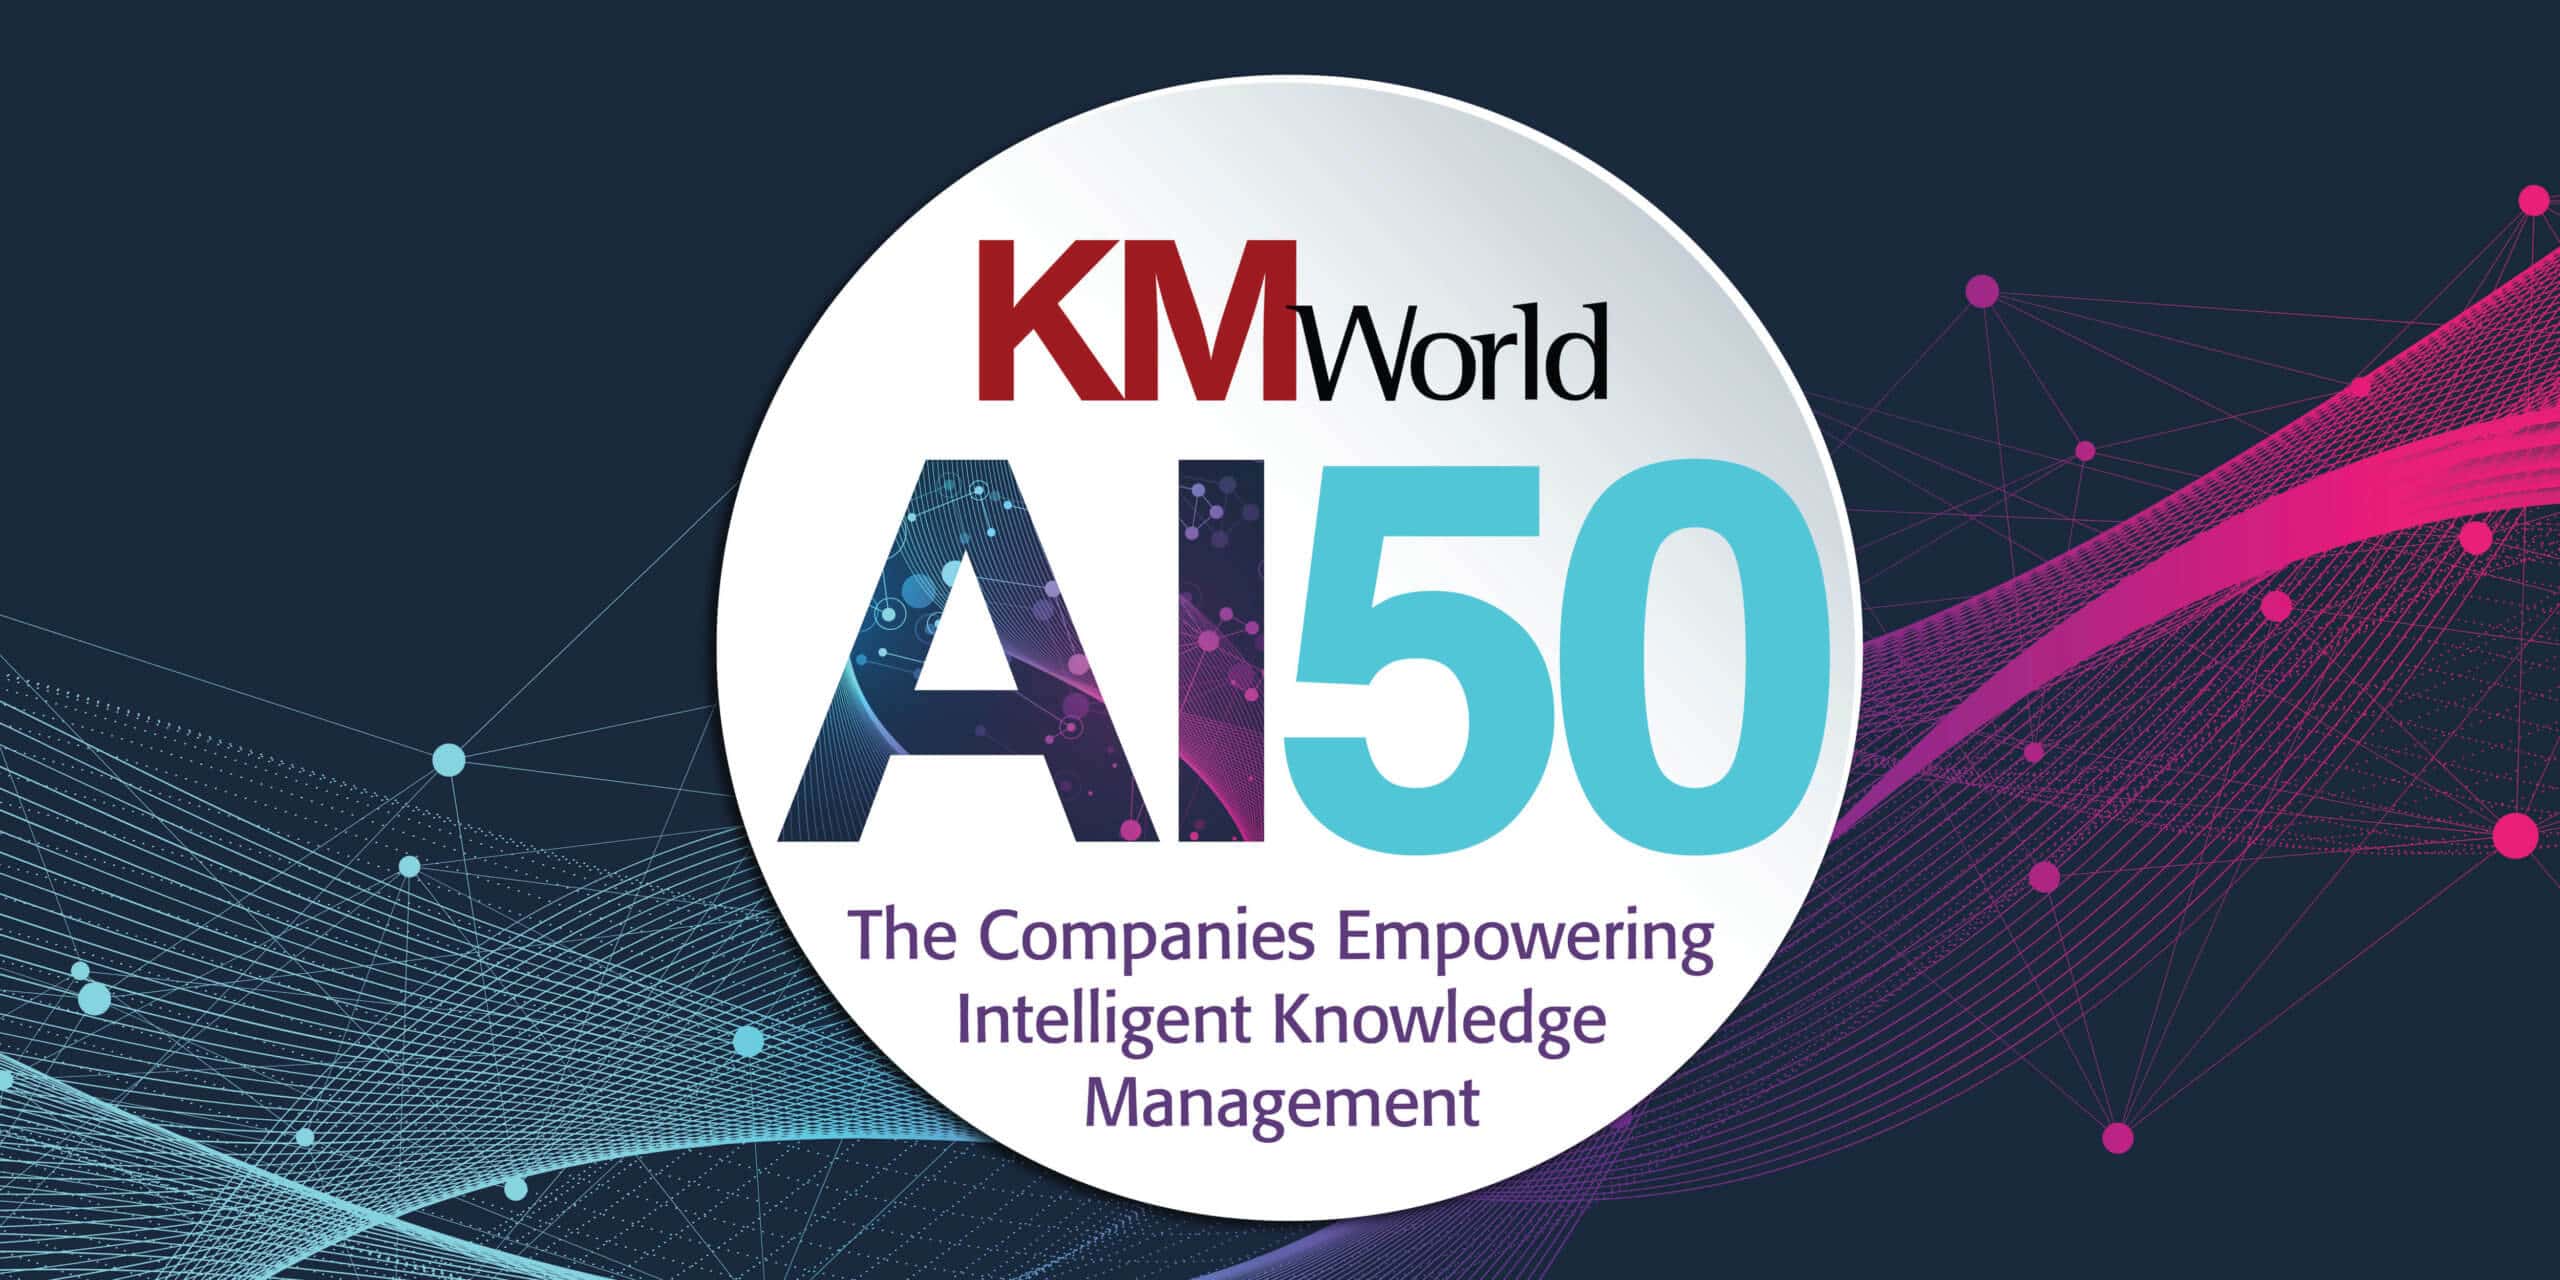 KMWorld AI 50: Capacity was featured on a list of the top 50 companies empowering intelligent knowledge management